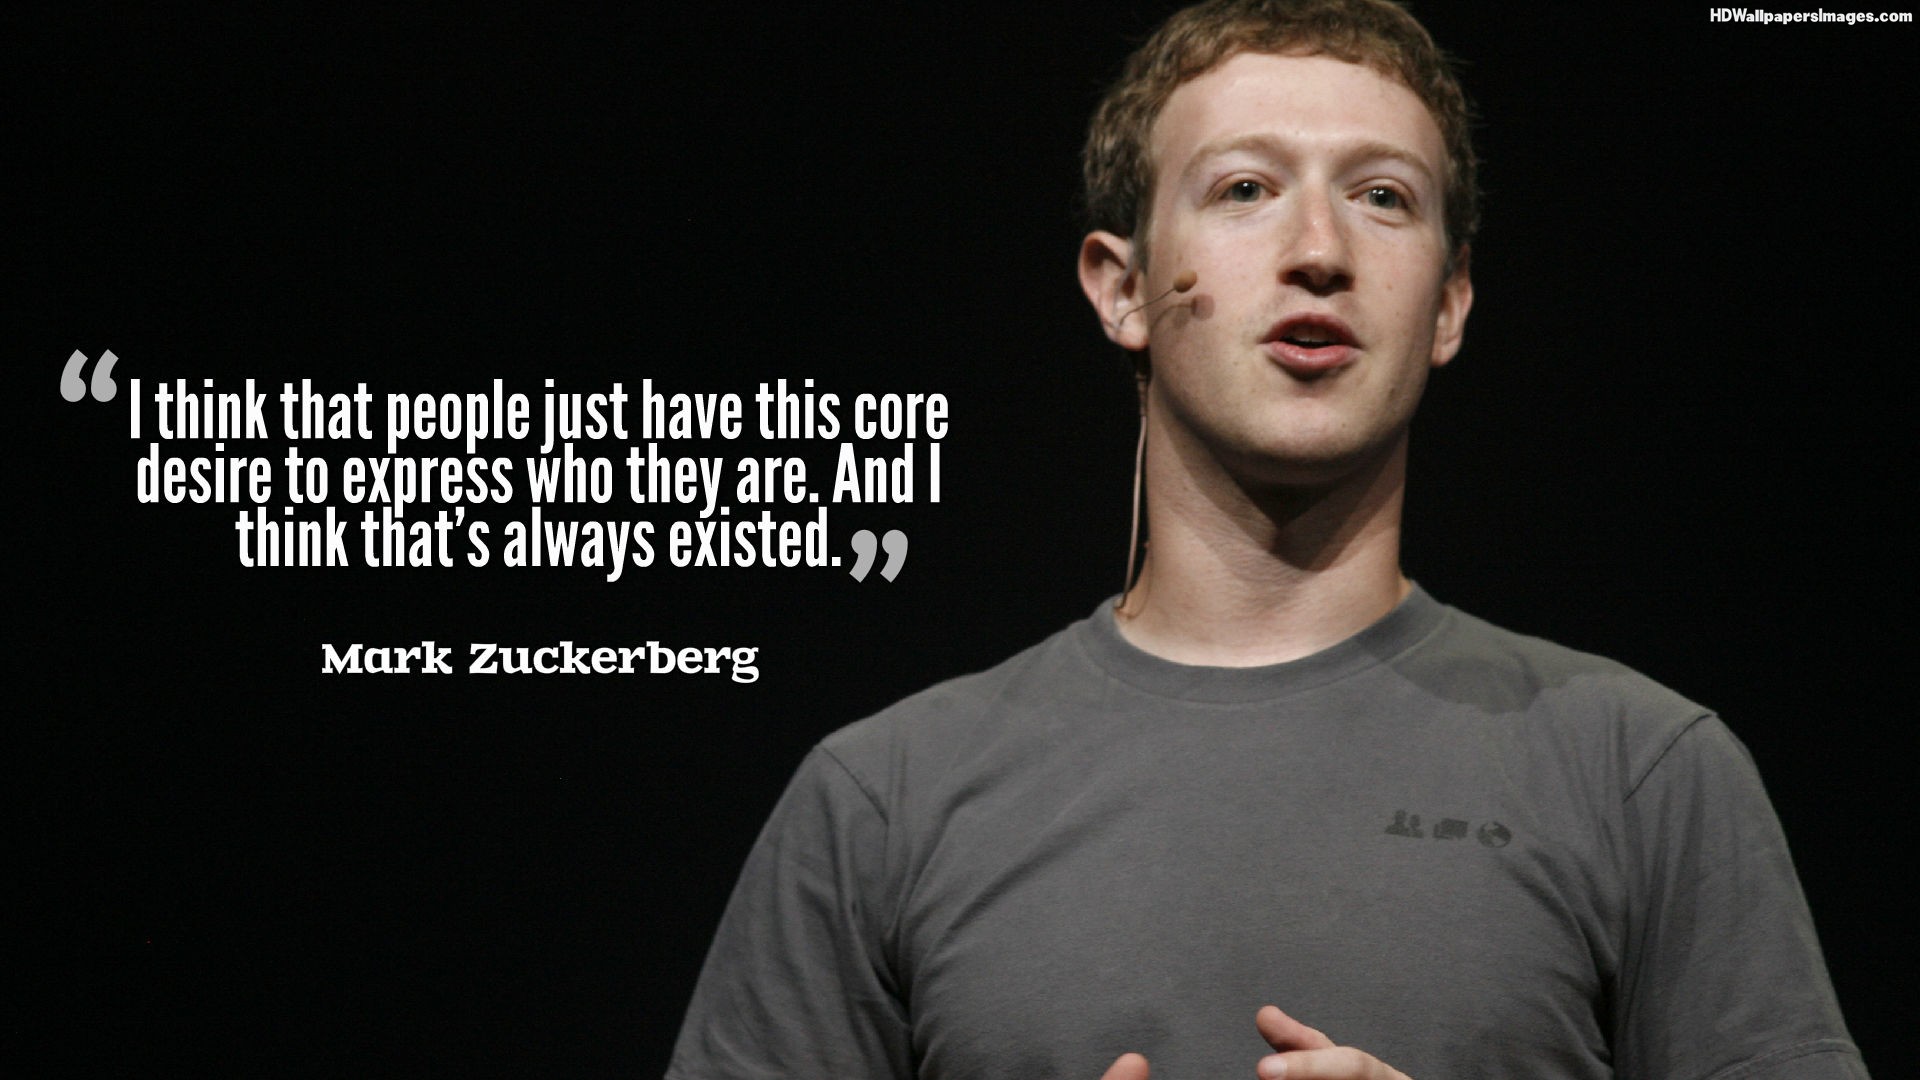 Mark Zuckerberg Images Png Hd New Transparent Background Free Download   PNG Images